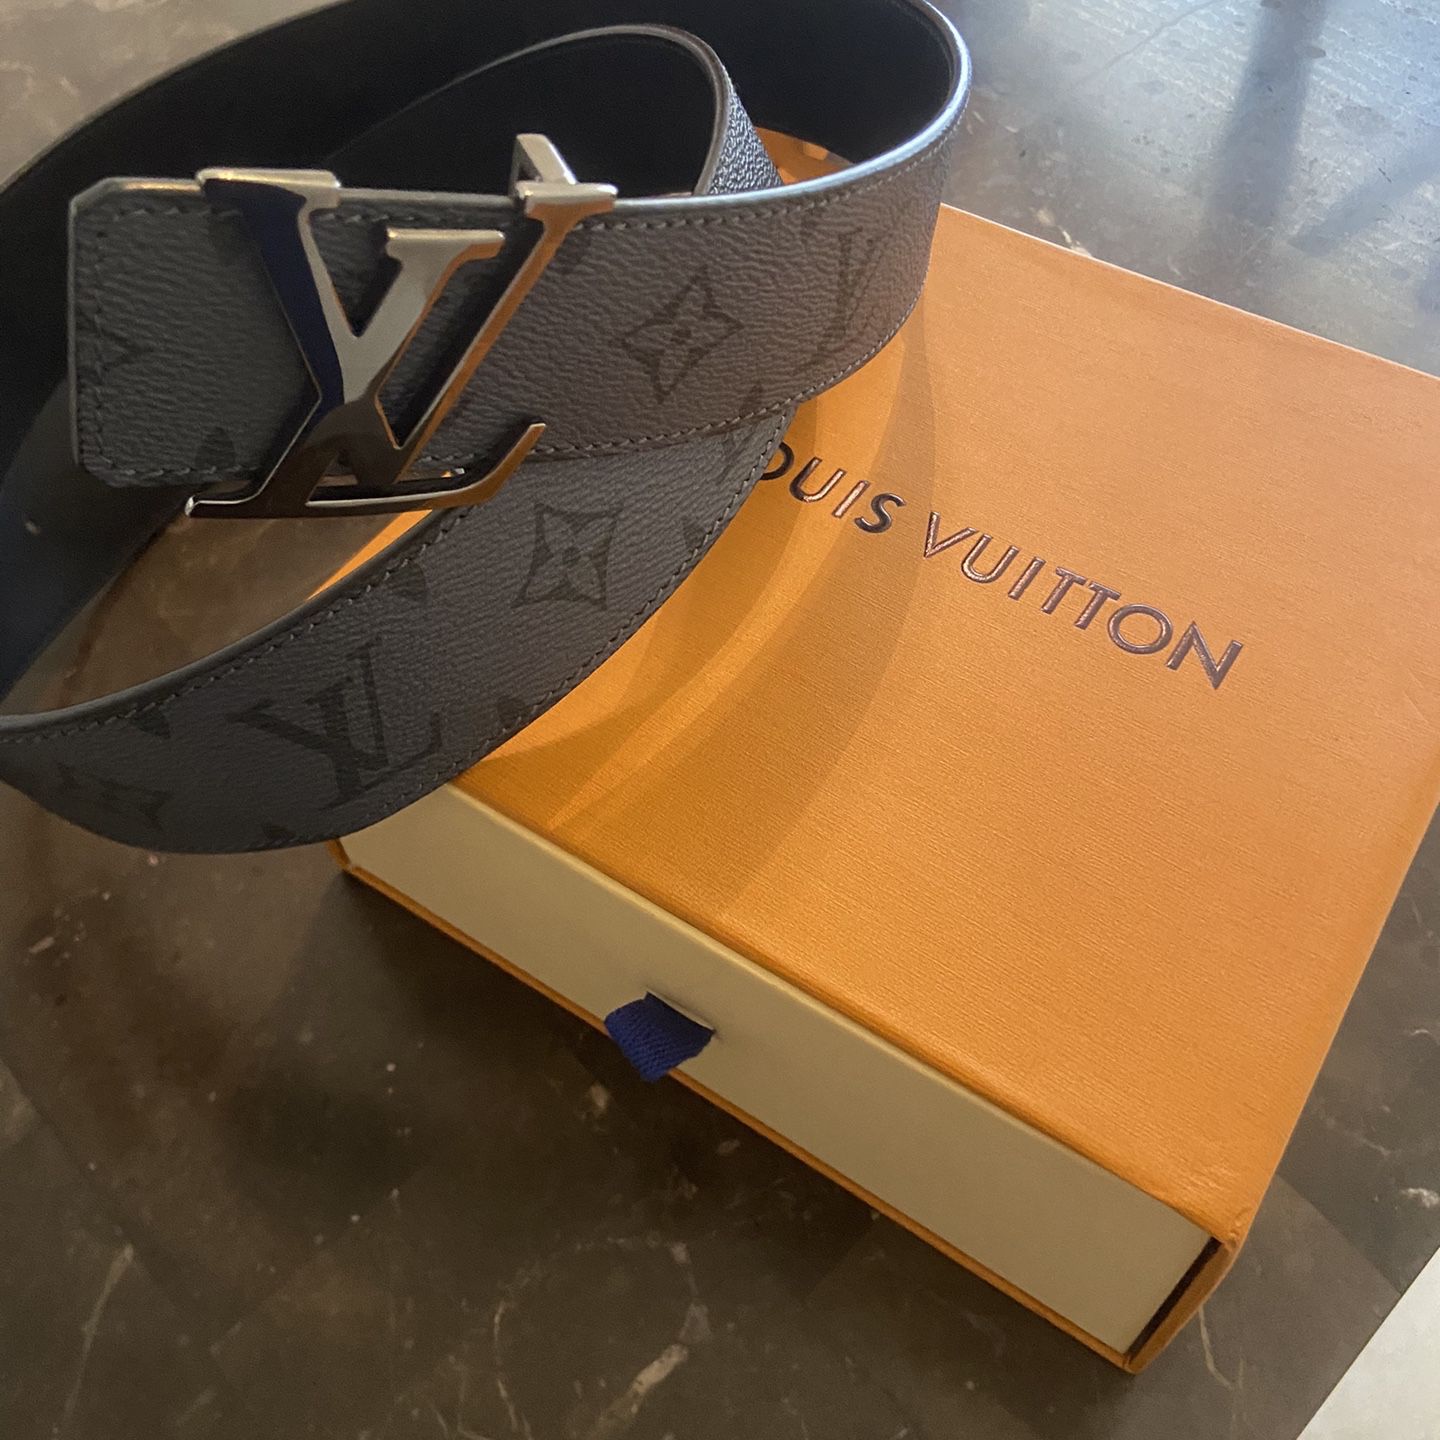 Blue Louis Vuitton LV Monogram Belt! Size 30-34! Brand New High Quality!!  for Sale in Las Vegas, NV - OfferUp